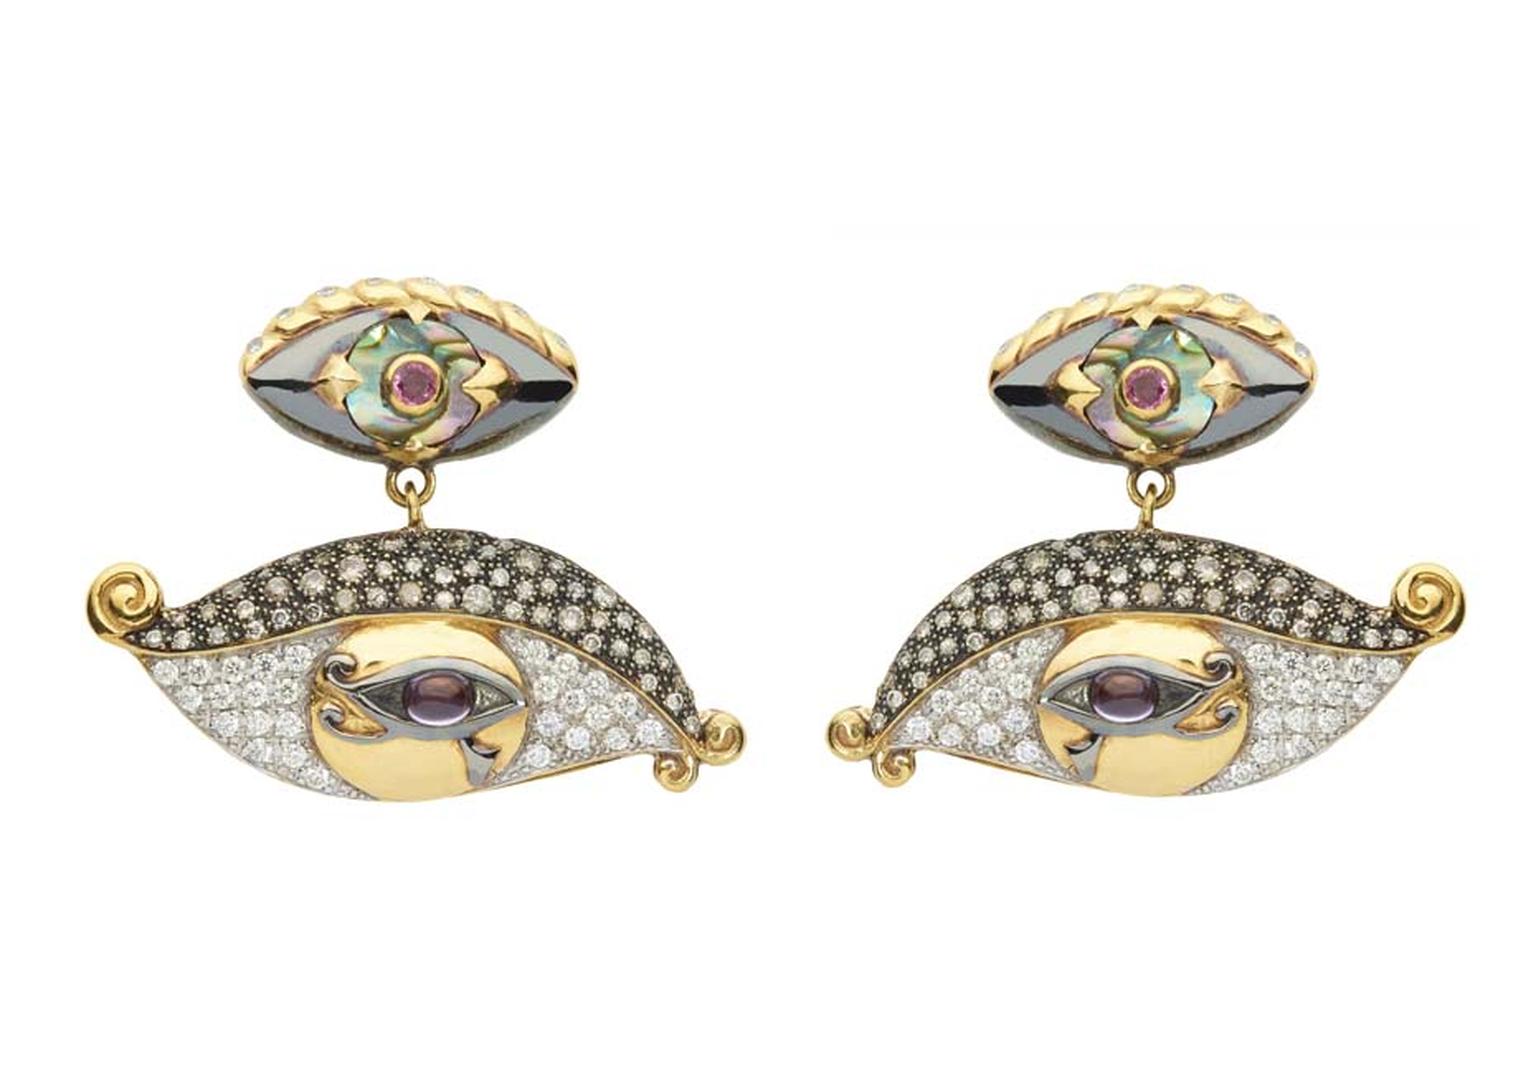 Sylvie Corbelin Fascination collection earrings featuring diamond and gem-encrusted eyes suspended from a central stud, also in the shape of an eye.